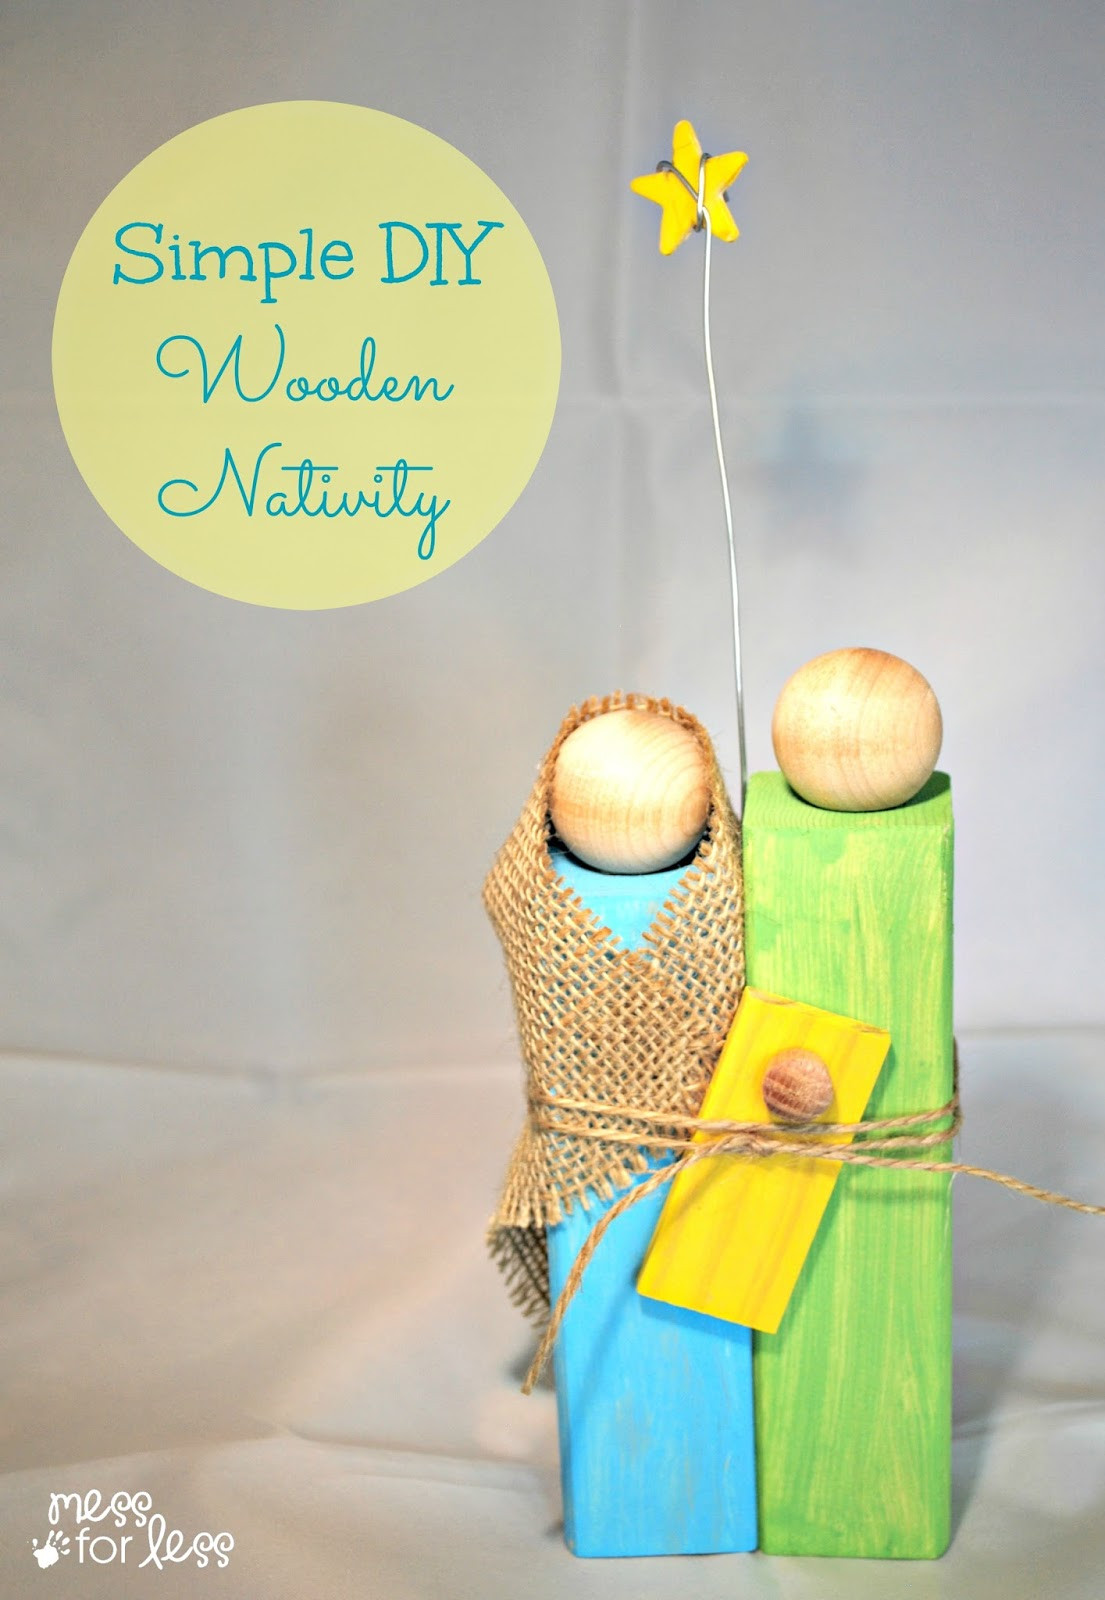 Wood Crafting Gifts
 Homemade Christmas Gifts Wooden Nativity Craft Mess